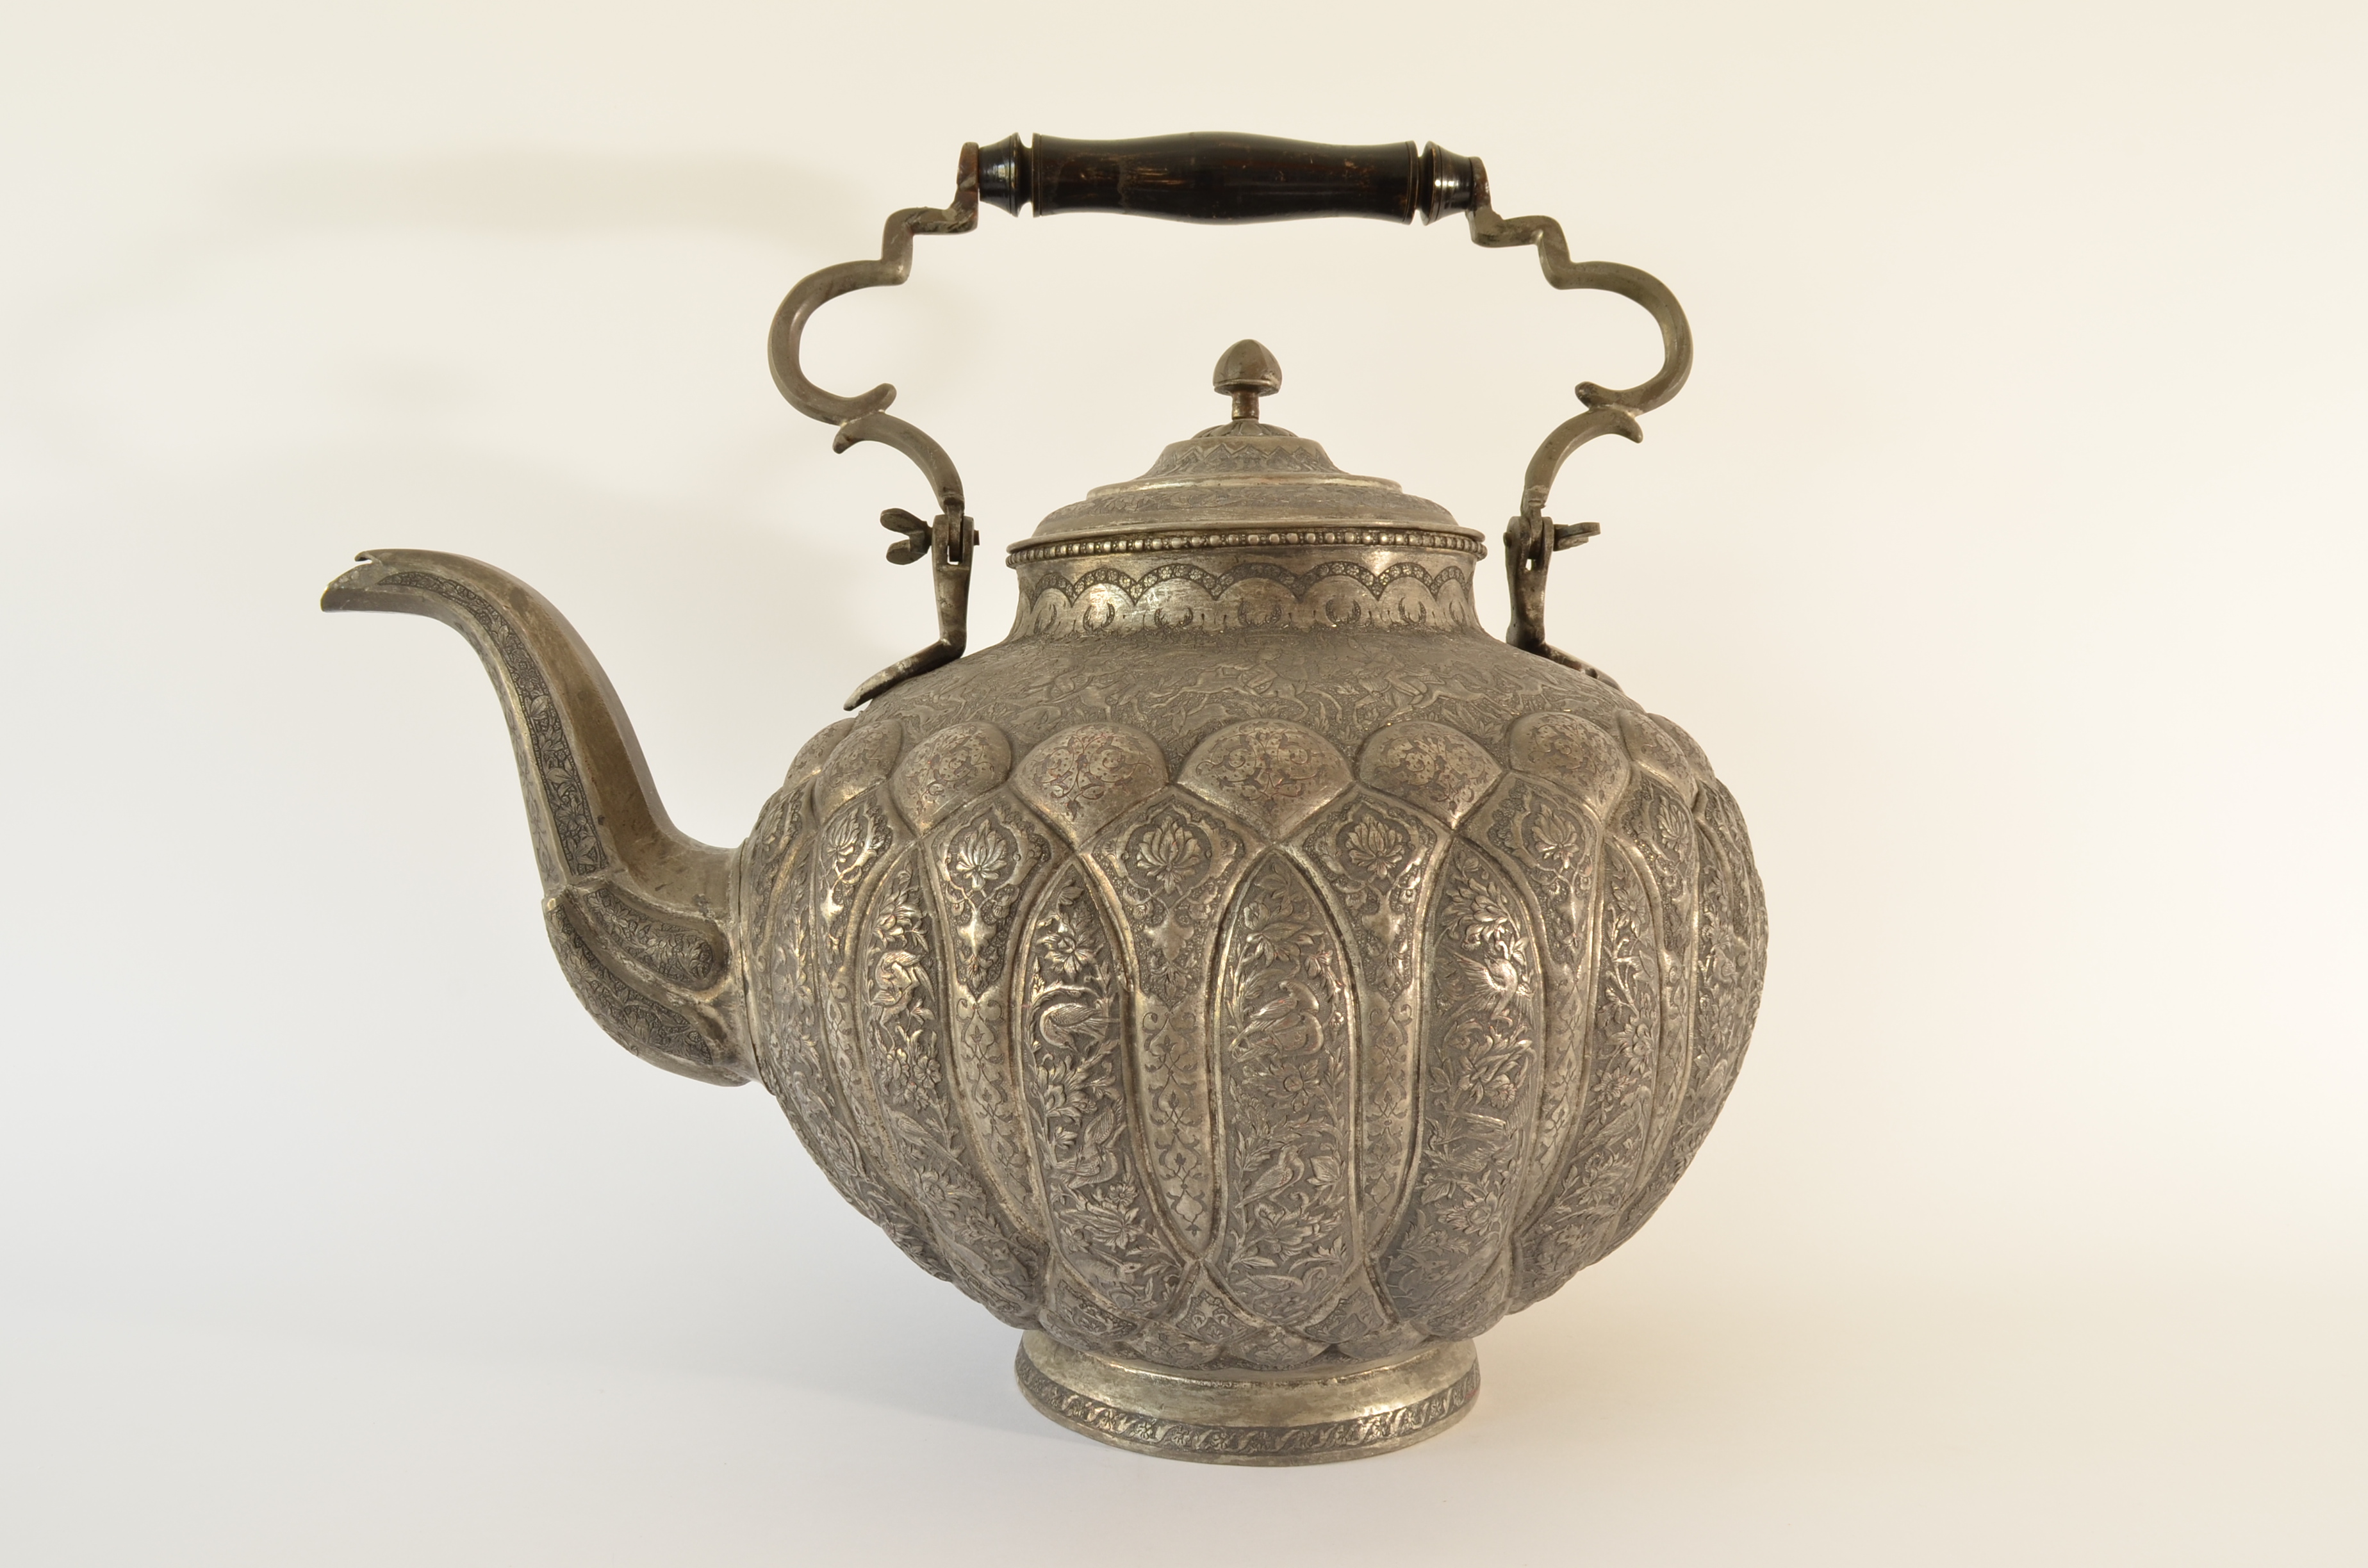 Large teapot, waterpot with neat engraved hunting scenes. Persia. Tinned copper. Neat engraved hunting scenes. 19th century. Iran – Isfahan.  Hallmarked and  monogrammed on the bottom.